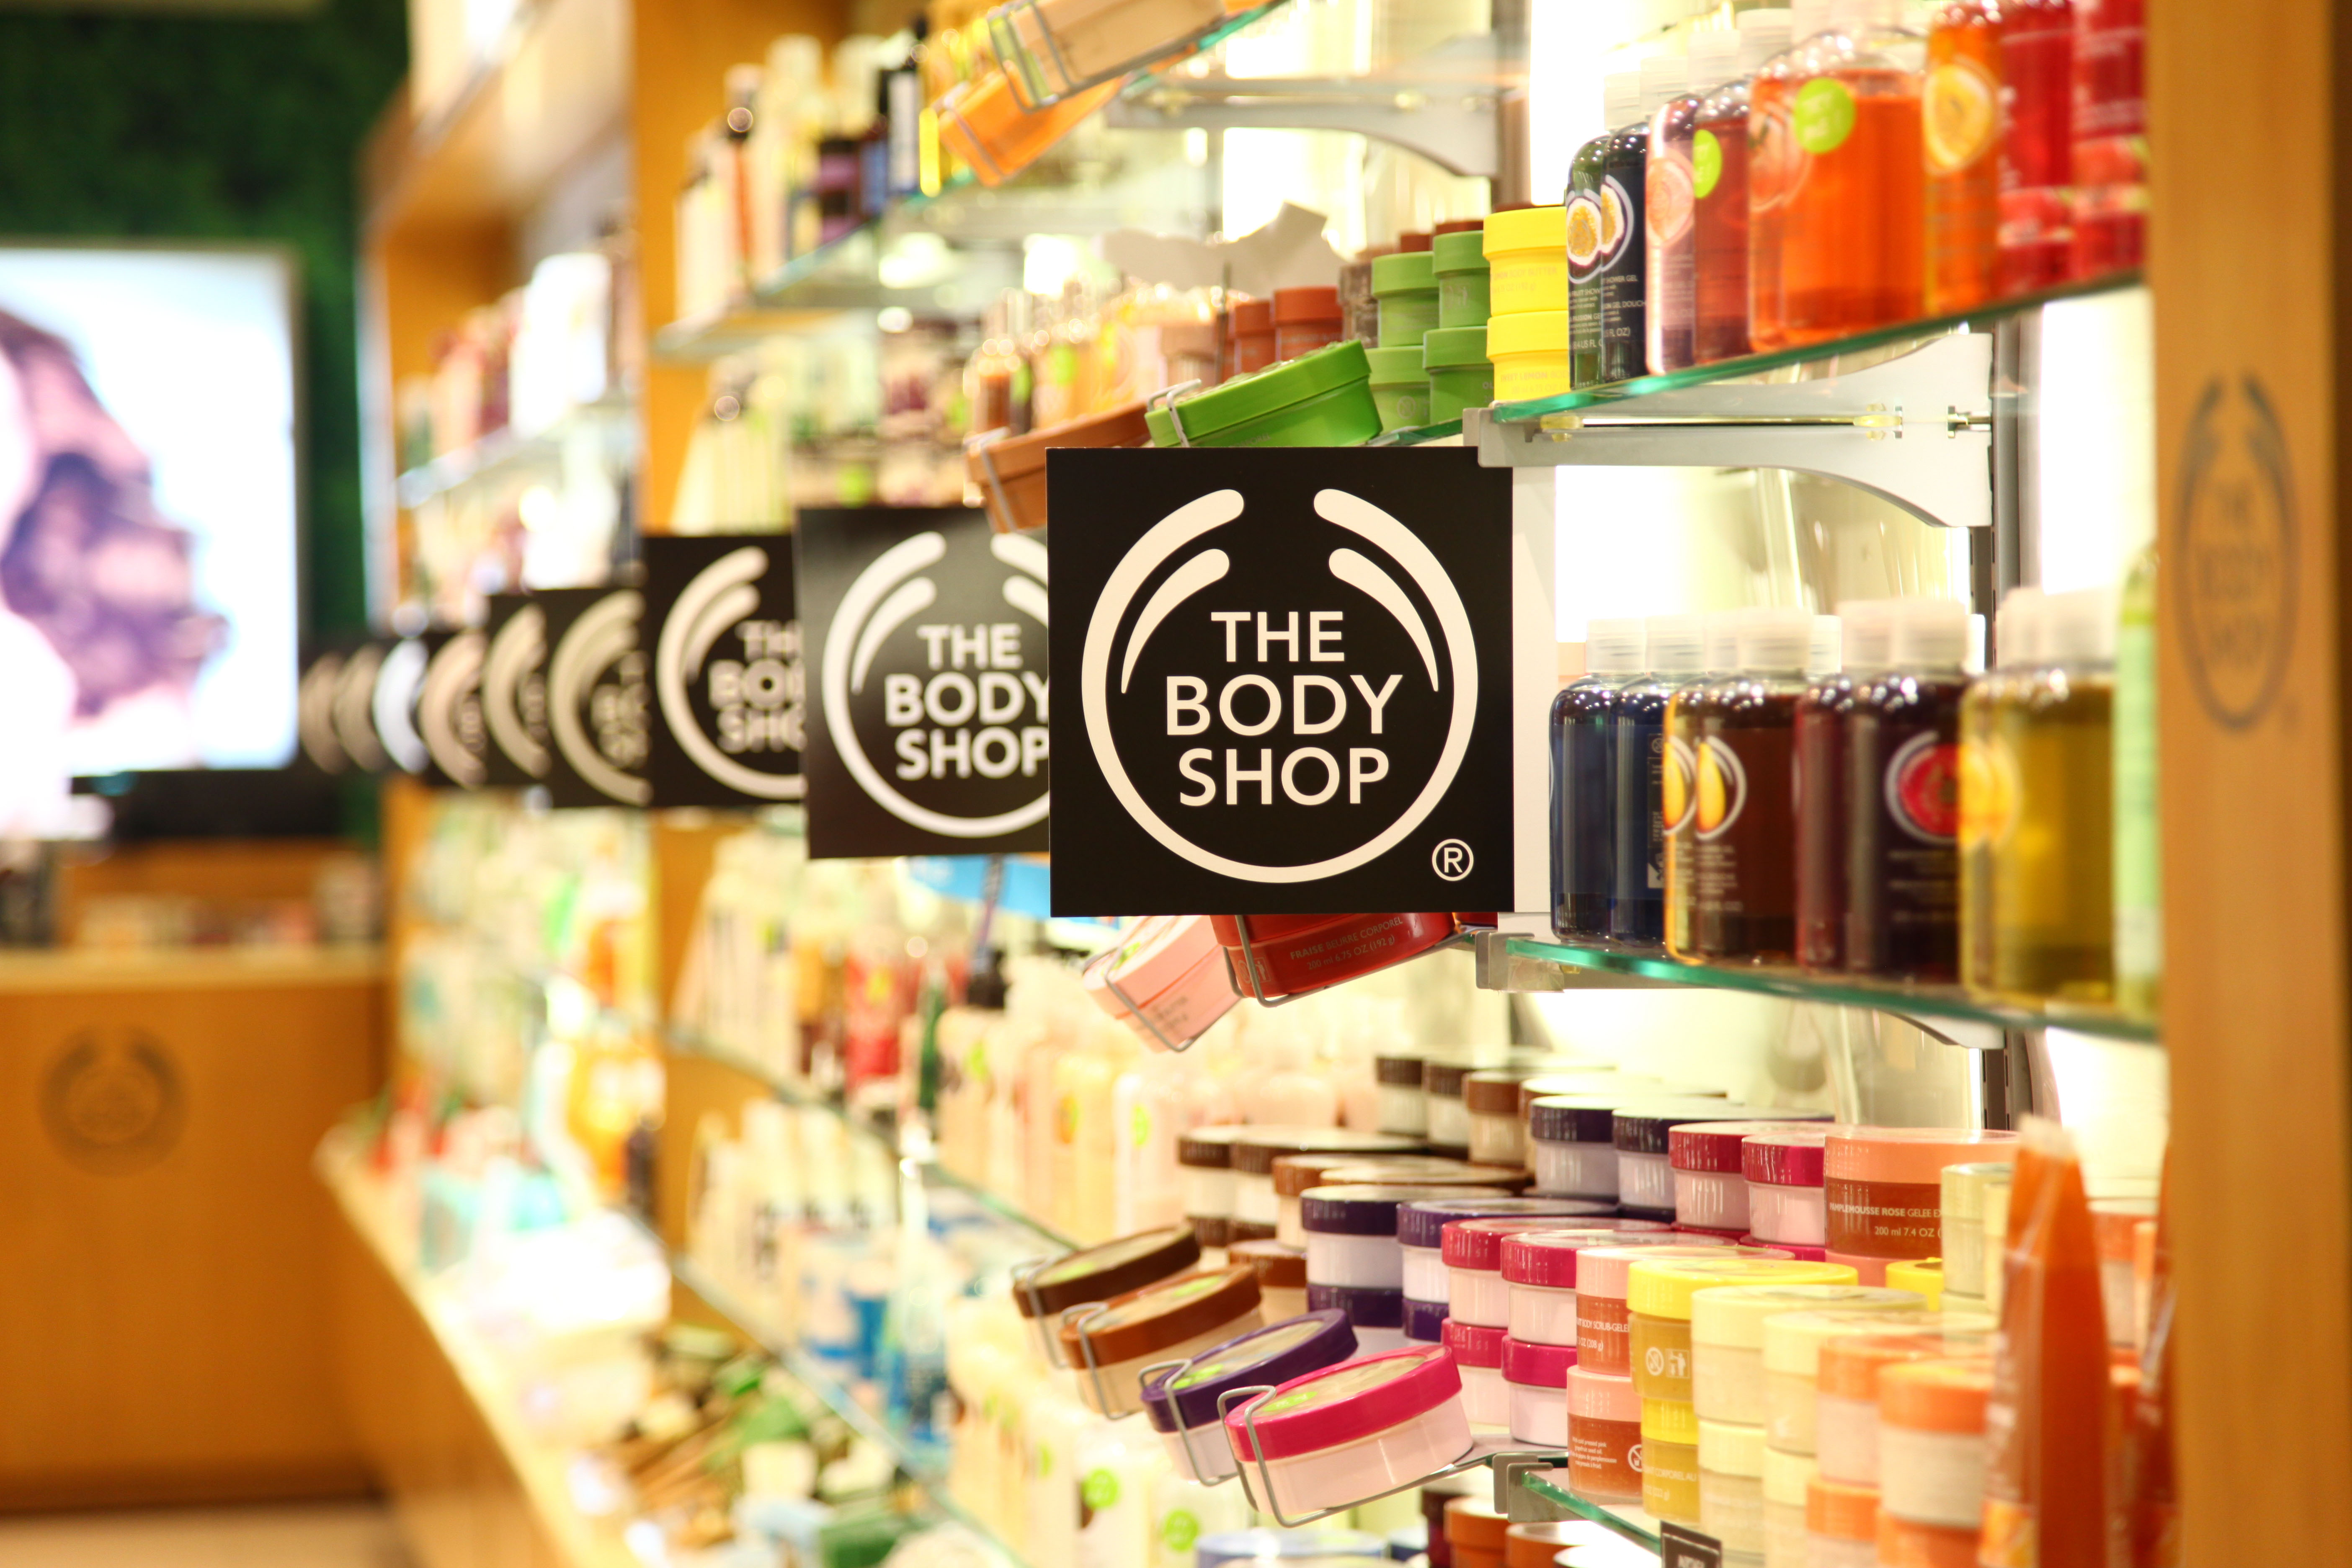 The Body Shop in-store signage